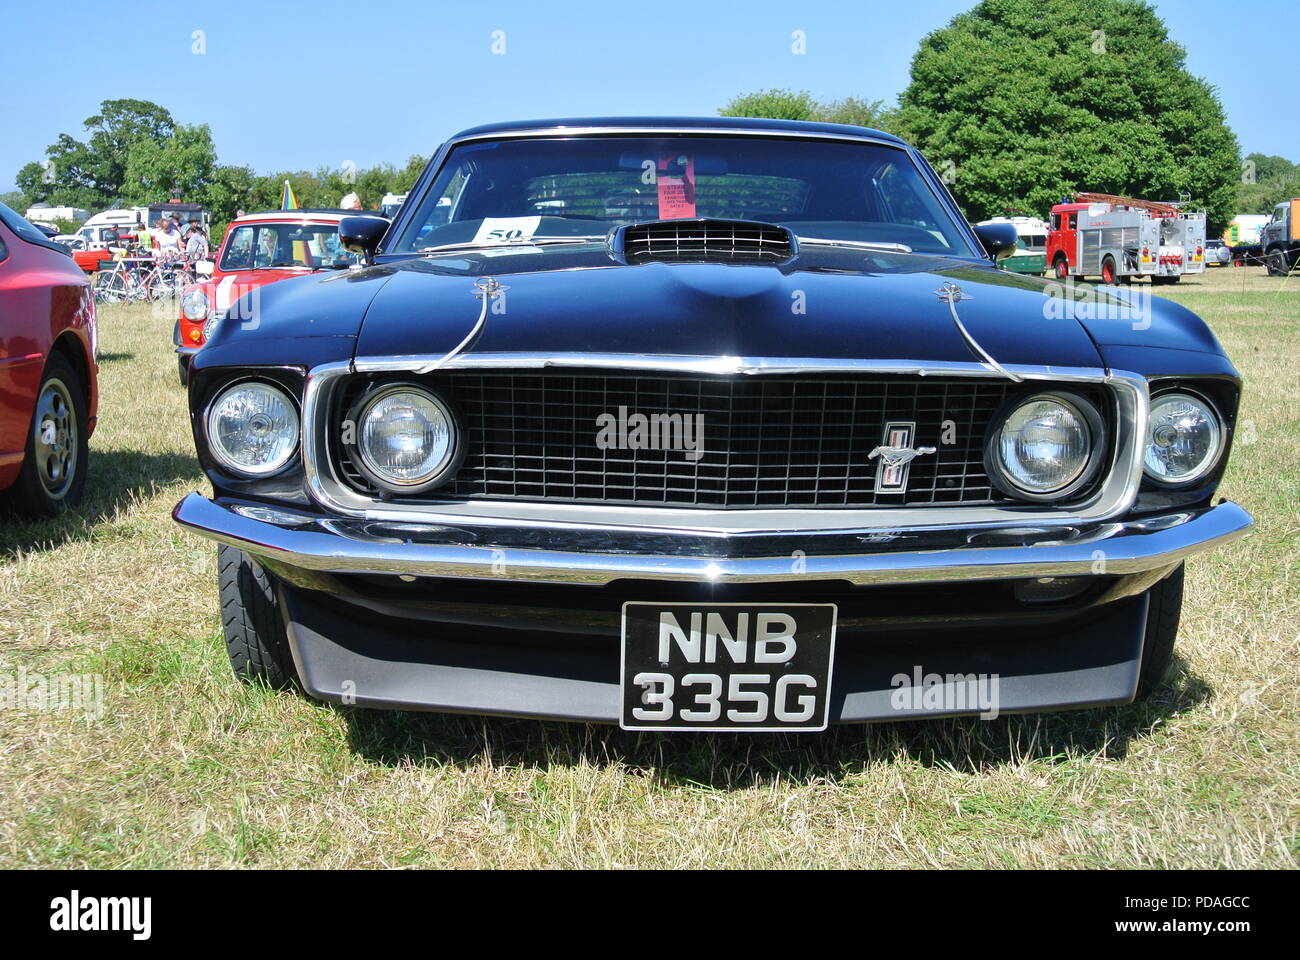 A 1966 Ford Mustang parked up on display at Torbay Steam Fair, Churston ...